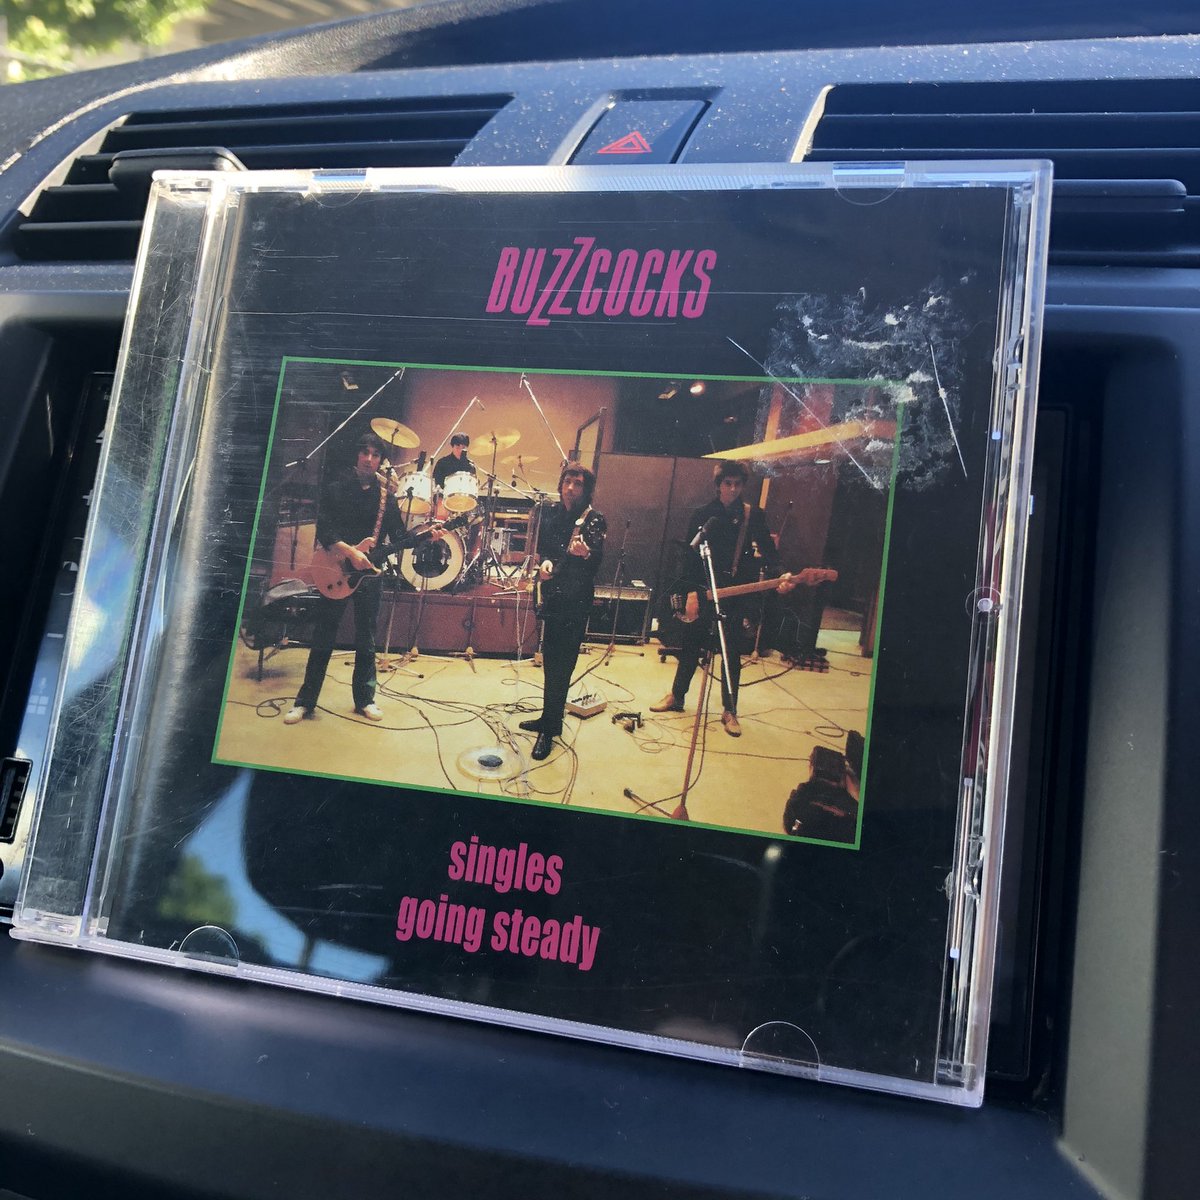 Listening to Buzzcocks on the drive to work